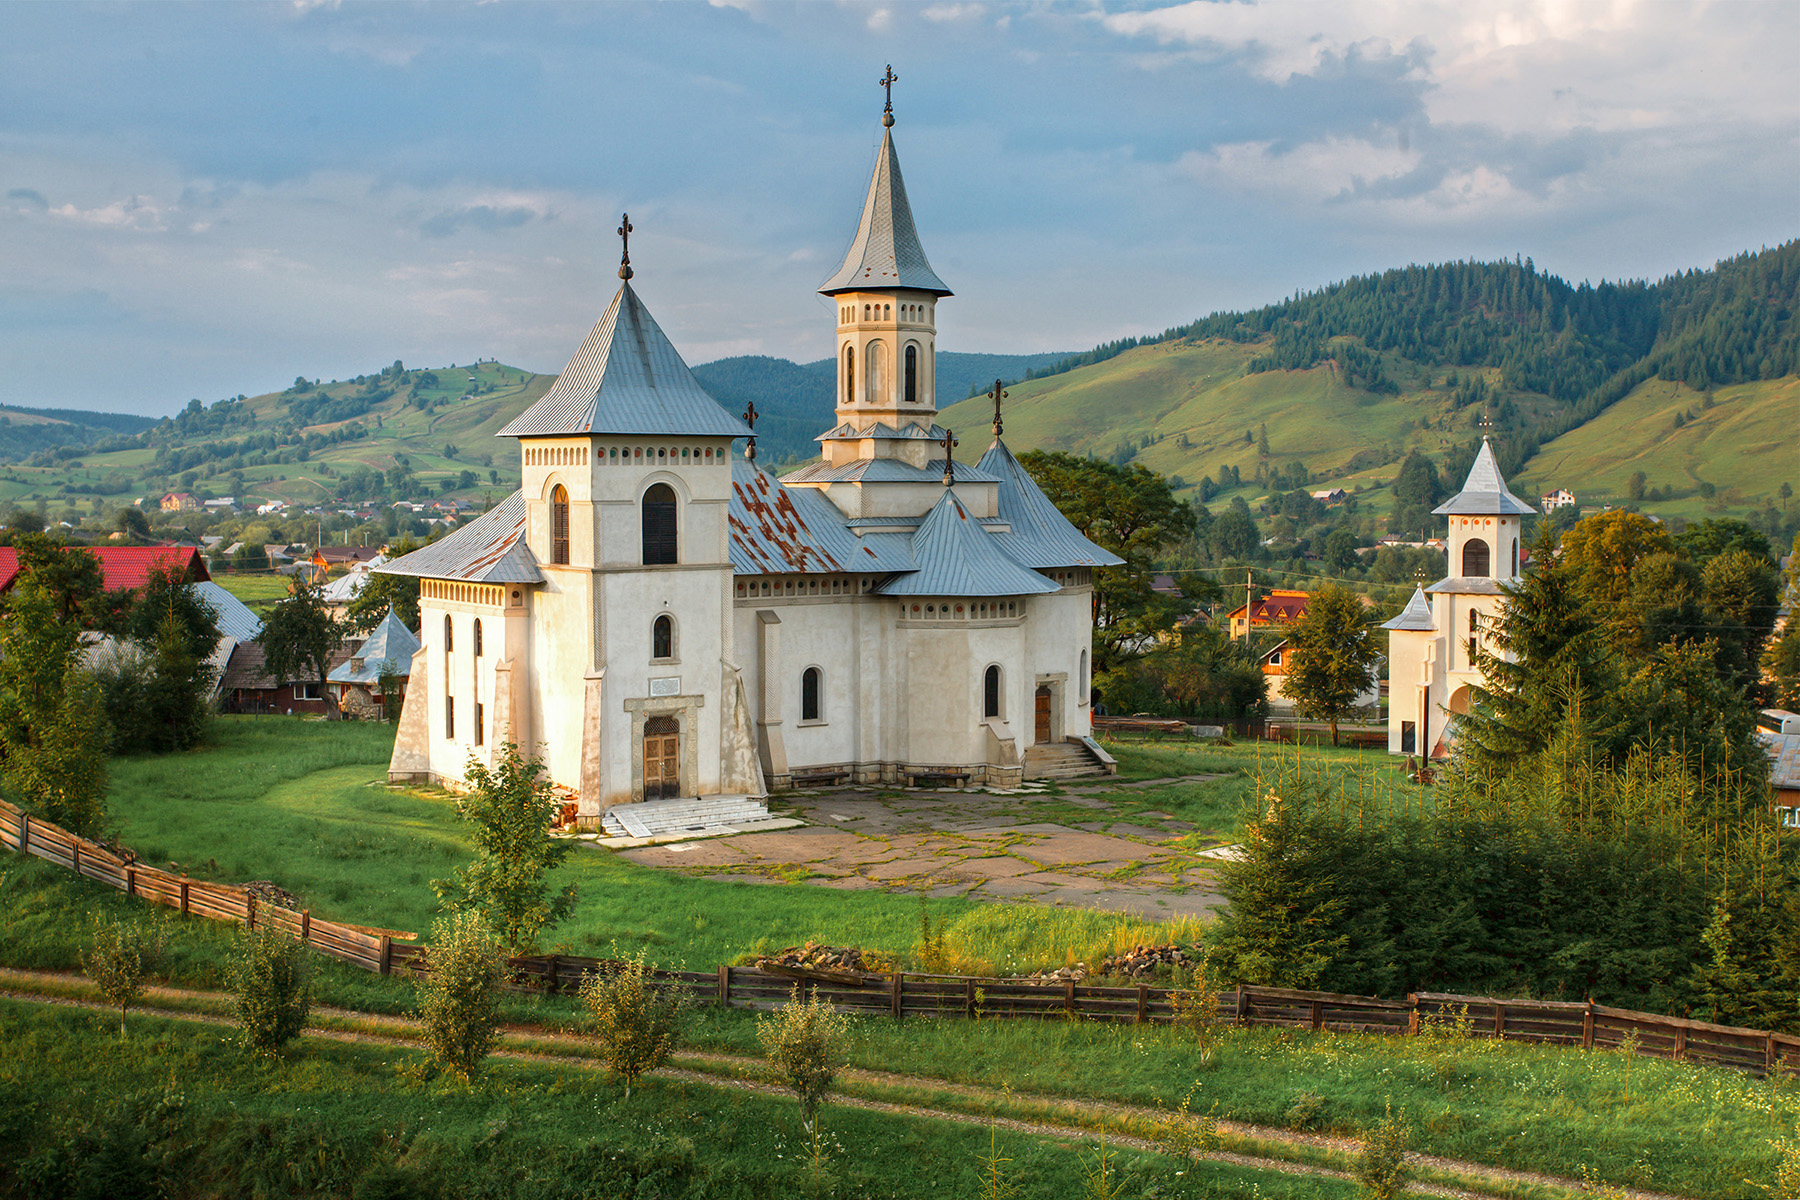 5. <strong>Romania</strong><br><strong>The skinny:</strong> 298% increase; the southeastern Balkan nation has managed to protect its virgin Transylvanian forests<br><strong>Choicest digs:</strong> <a href="https://www.airbnb.com/rooms/25700698?source_impression_id=p3_1572463108_d0pblX46PGTrBV00">Transylvania Tree House</a>